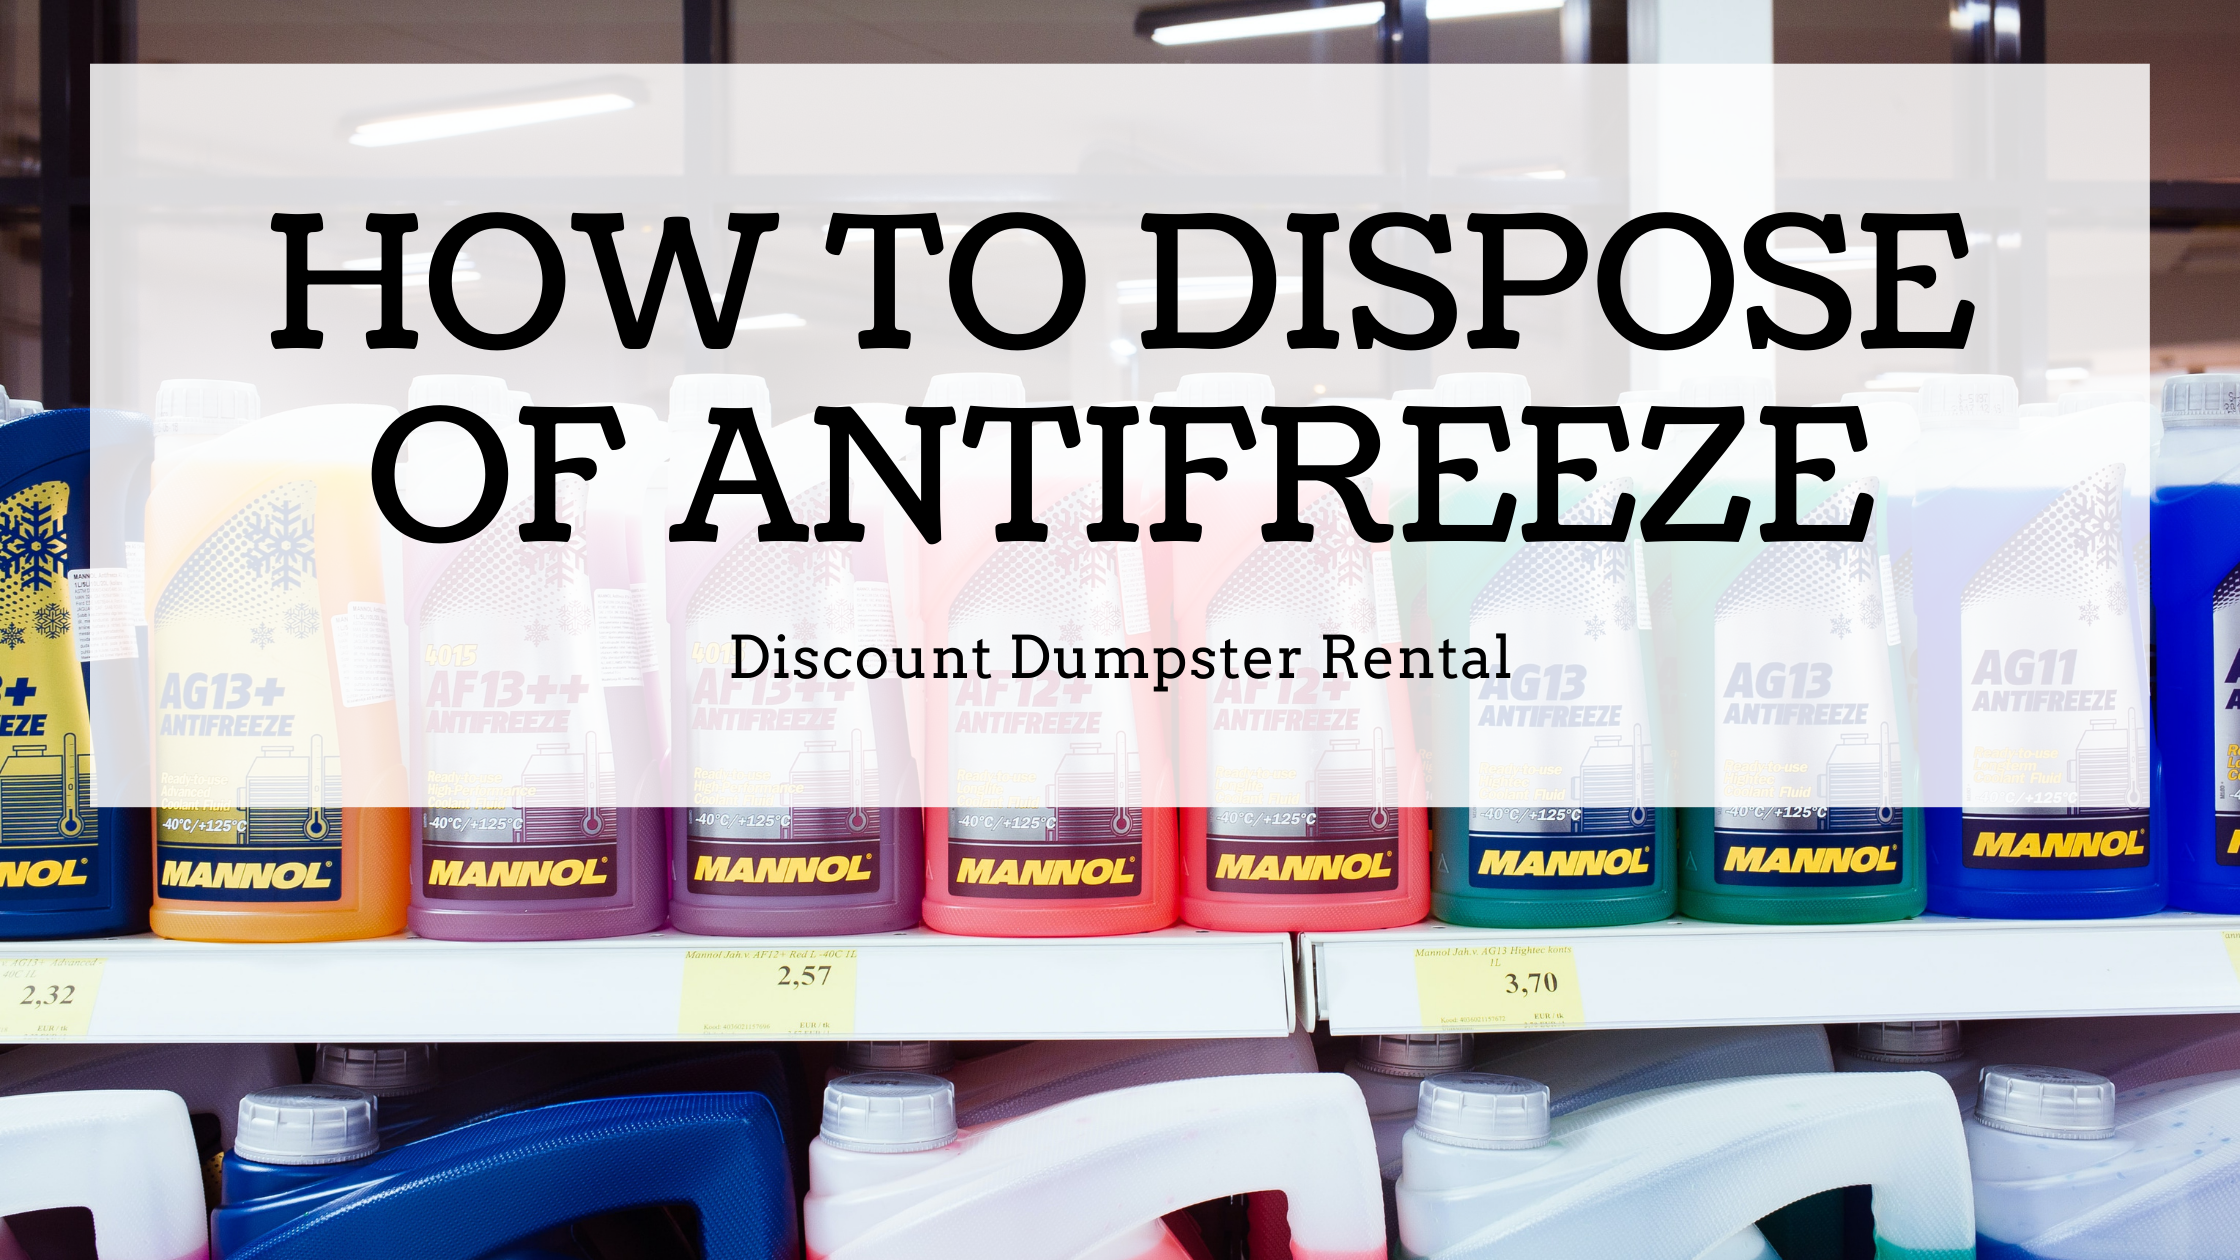 How to Dispose of Antifreeze | Discount Dumpster Rental